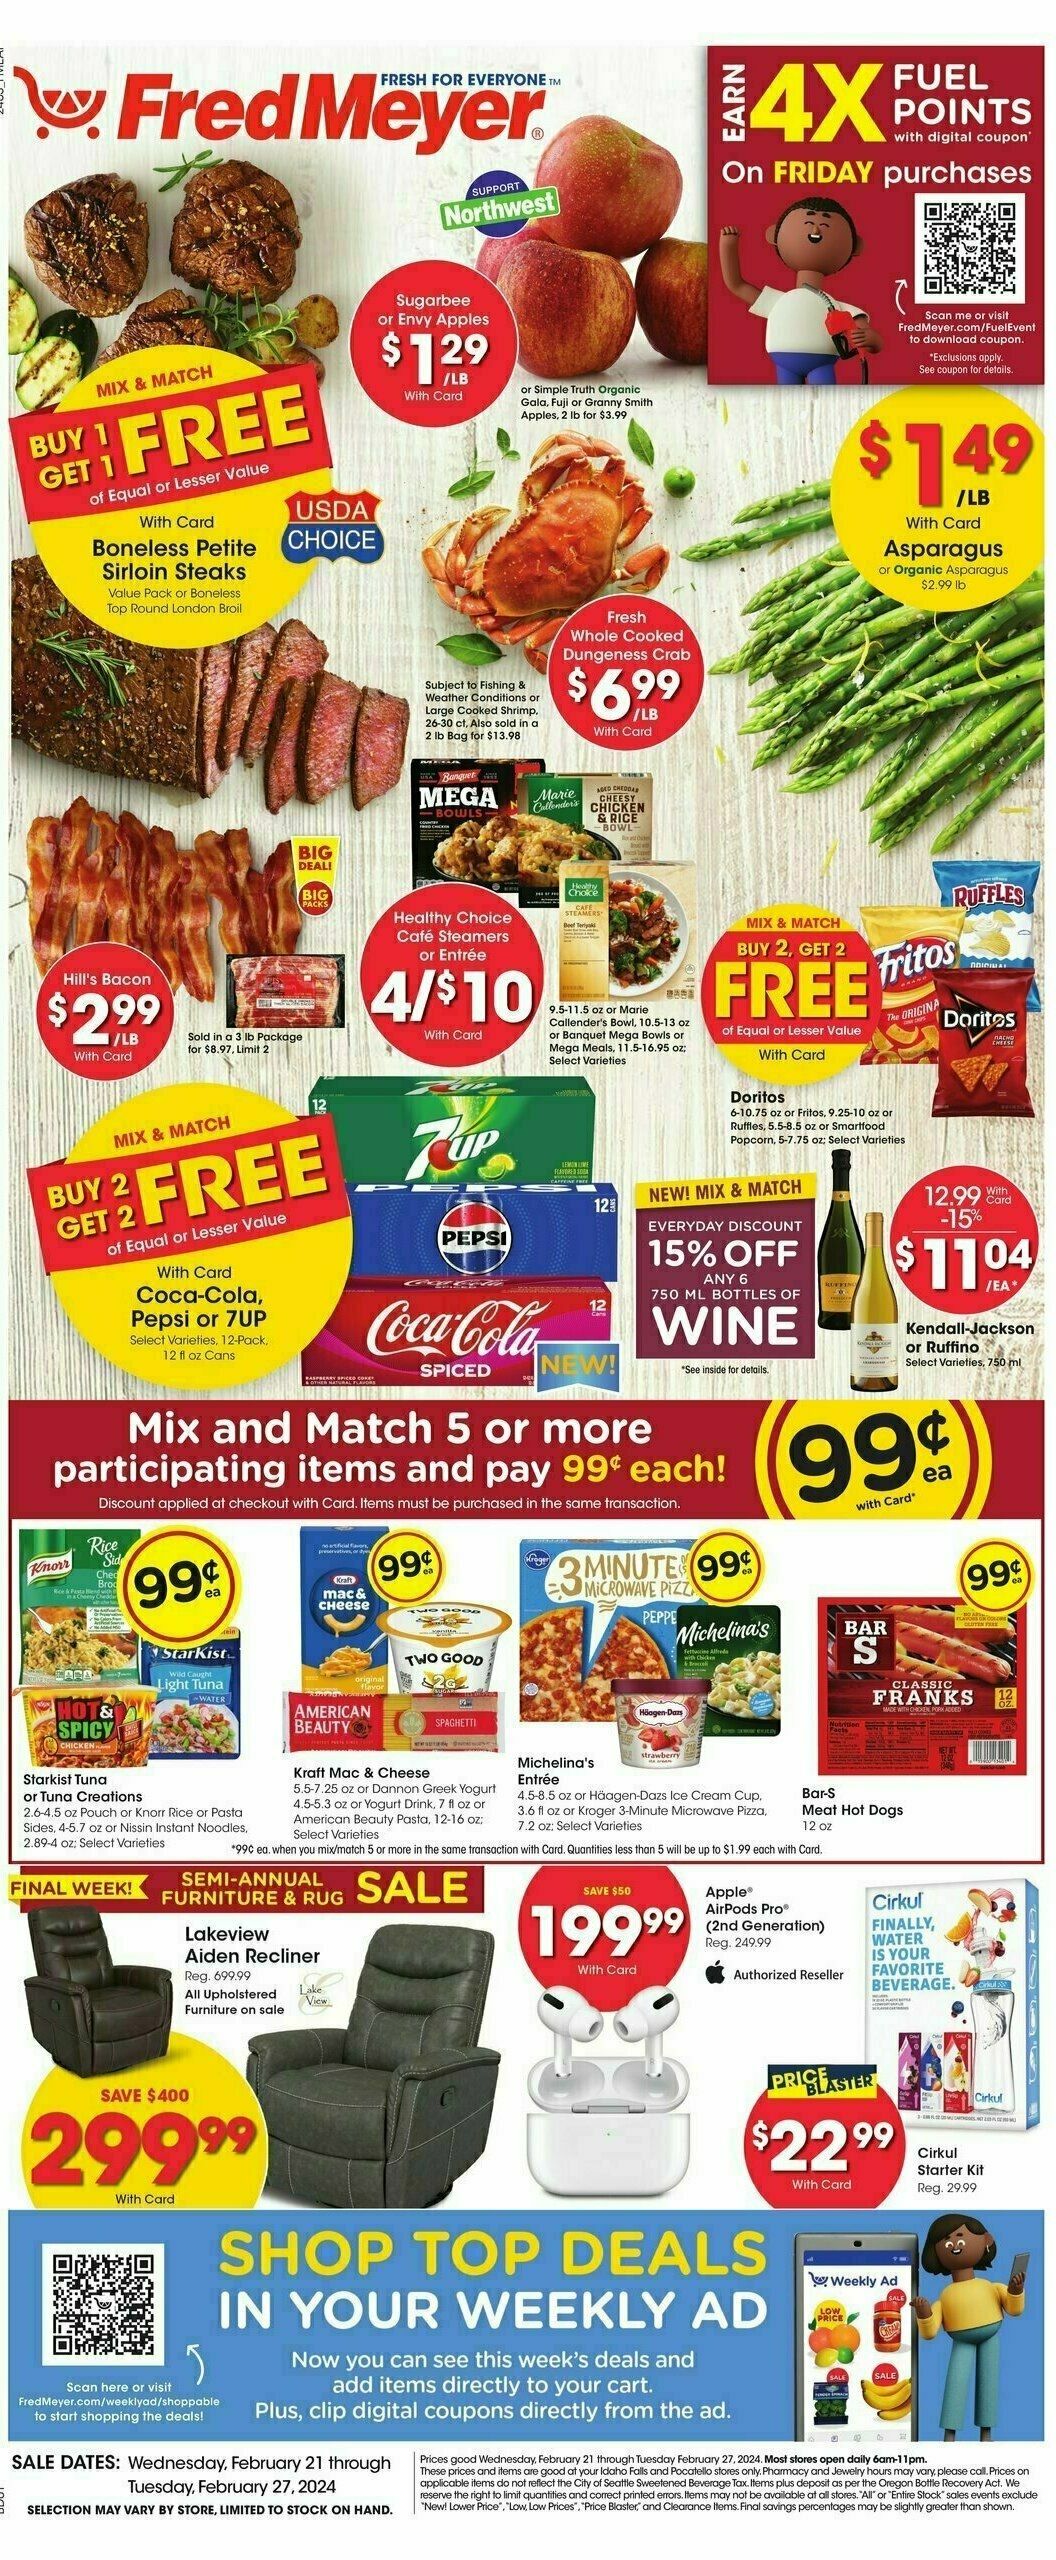 Fred Meyer Weekly Ad from February 21